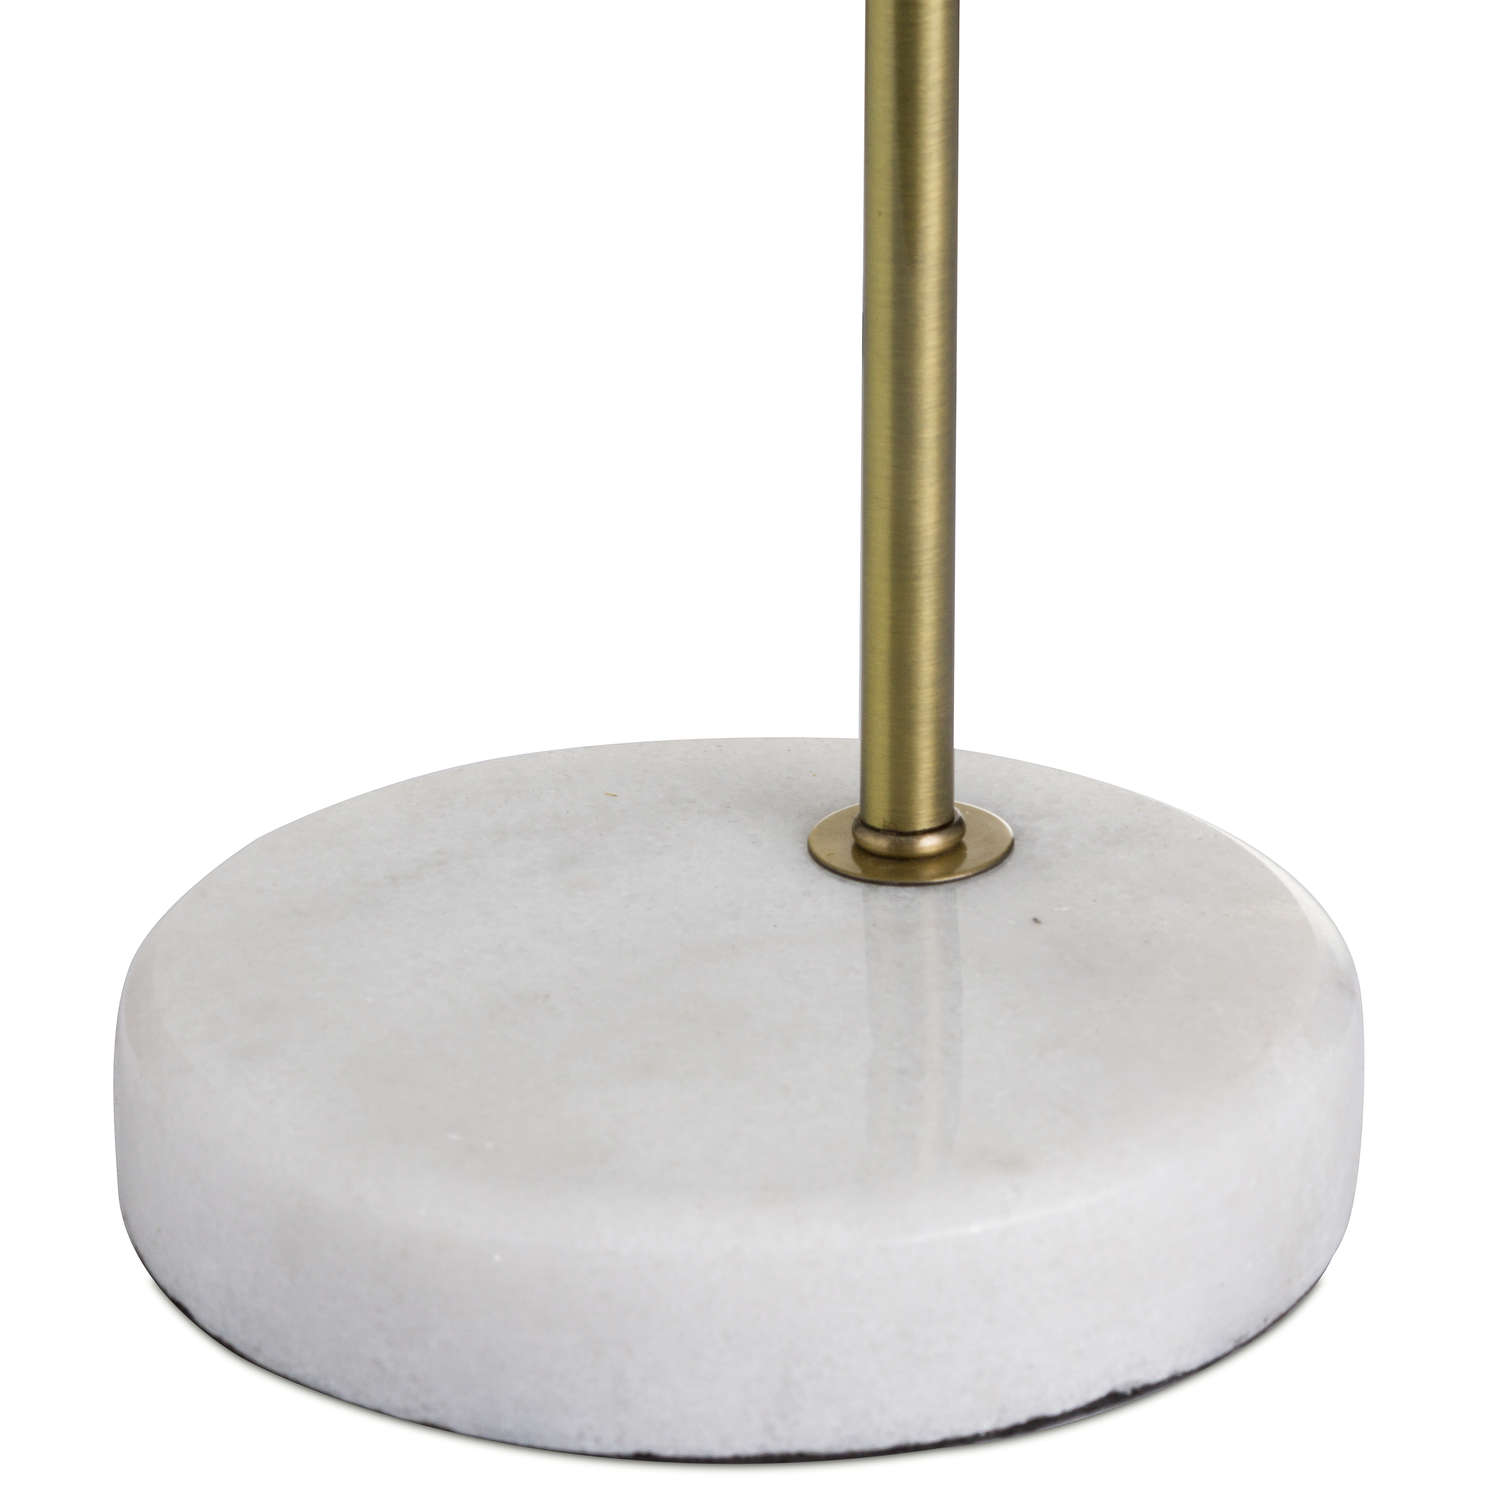 Marble And Brass Industrial Desk Lamp - Image 3